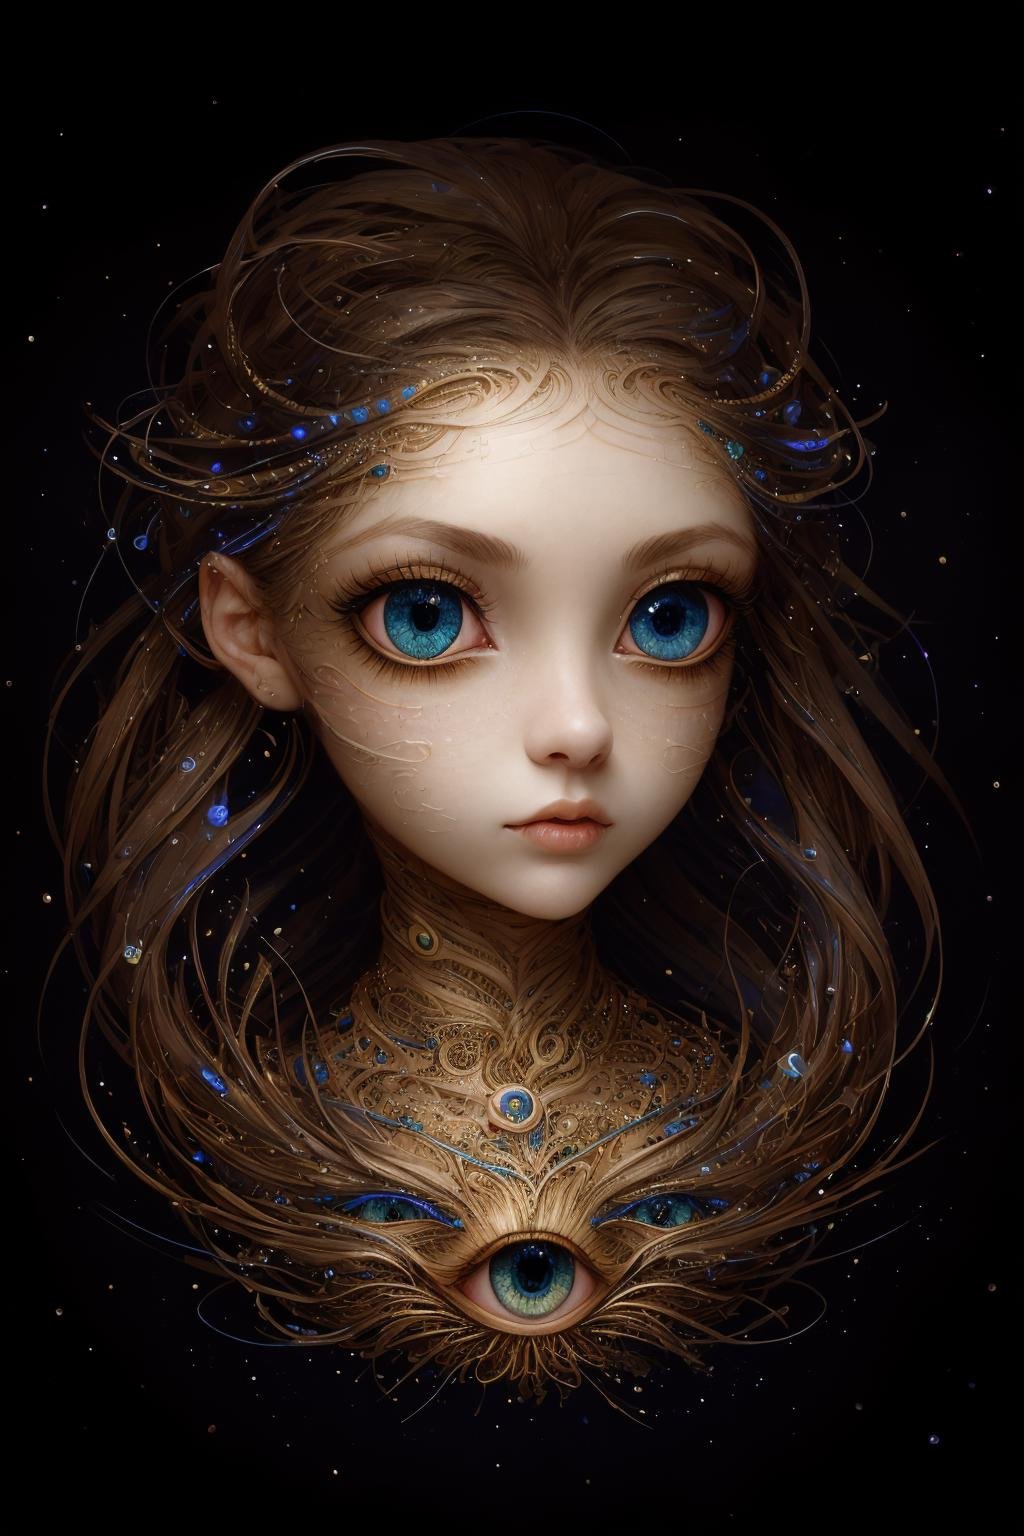 (masterpiece, hi resolution, hd wallpaper, extra resolution, best quality, intricate details:1.3), a woman's head flying in the black void, further, skin turning into ribbons and paper cuts, ribbons instead of hair, black background, isolated on black, starry sky, liquid flash, balls, (pretty face:1.3), (big eyes with elegant eyelashes:1.3), galaxy in eyes, artwork by AIDA_NH_humans, surrealistic portrait in style of AIDA_NH_humans <lora:AIDA_NH_humans:0.58>